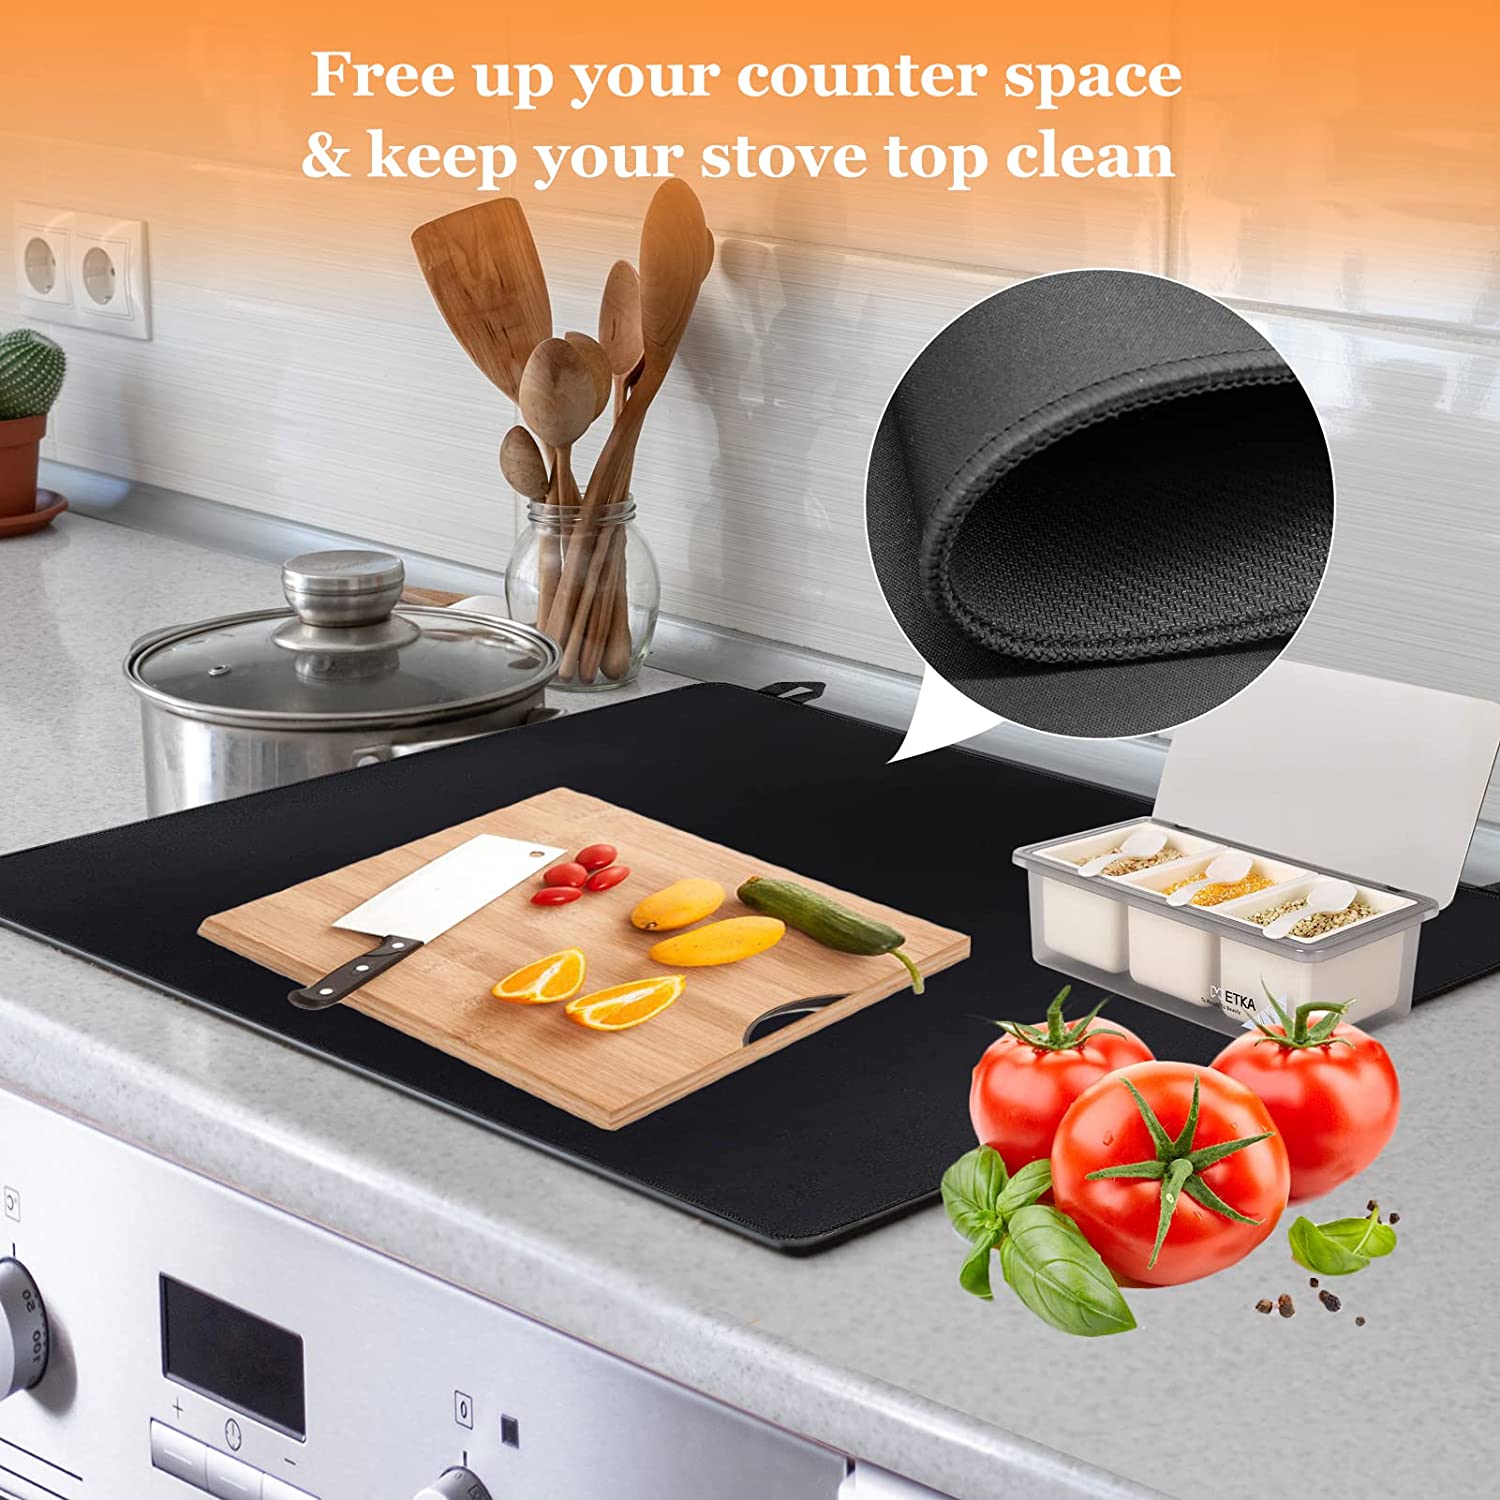 Stove Top Covers (28.5 x 20.5), Foldable Glass Electric Stove Top  Protector Cover Prevents Scratching, Heat Resistant Washer Dryer Ironing  Mat